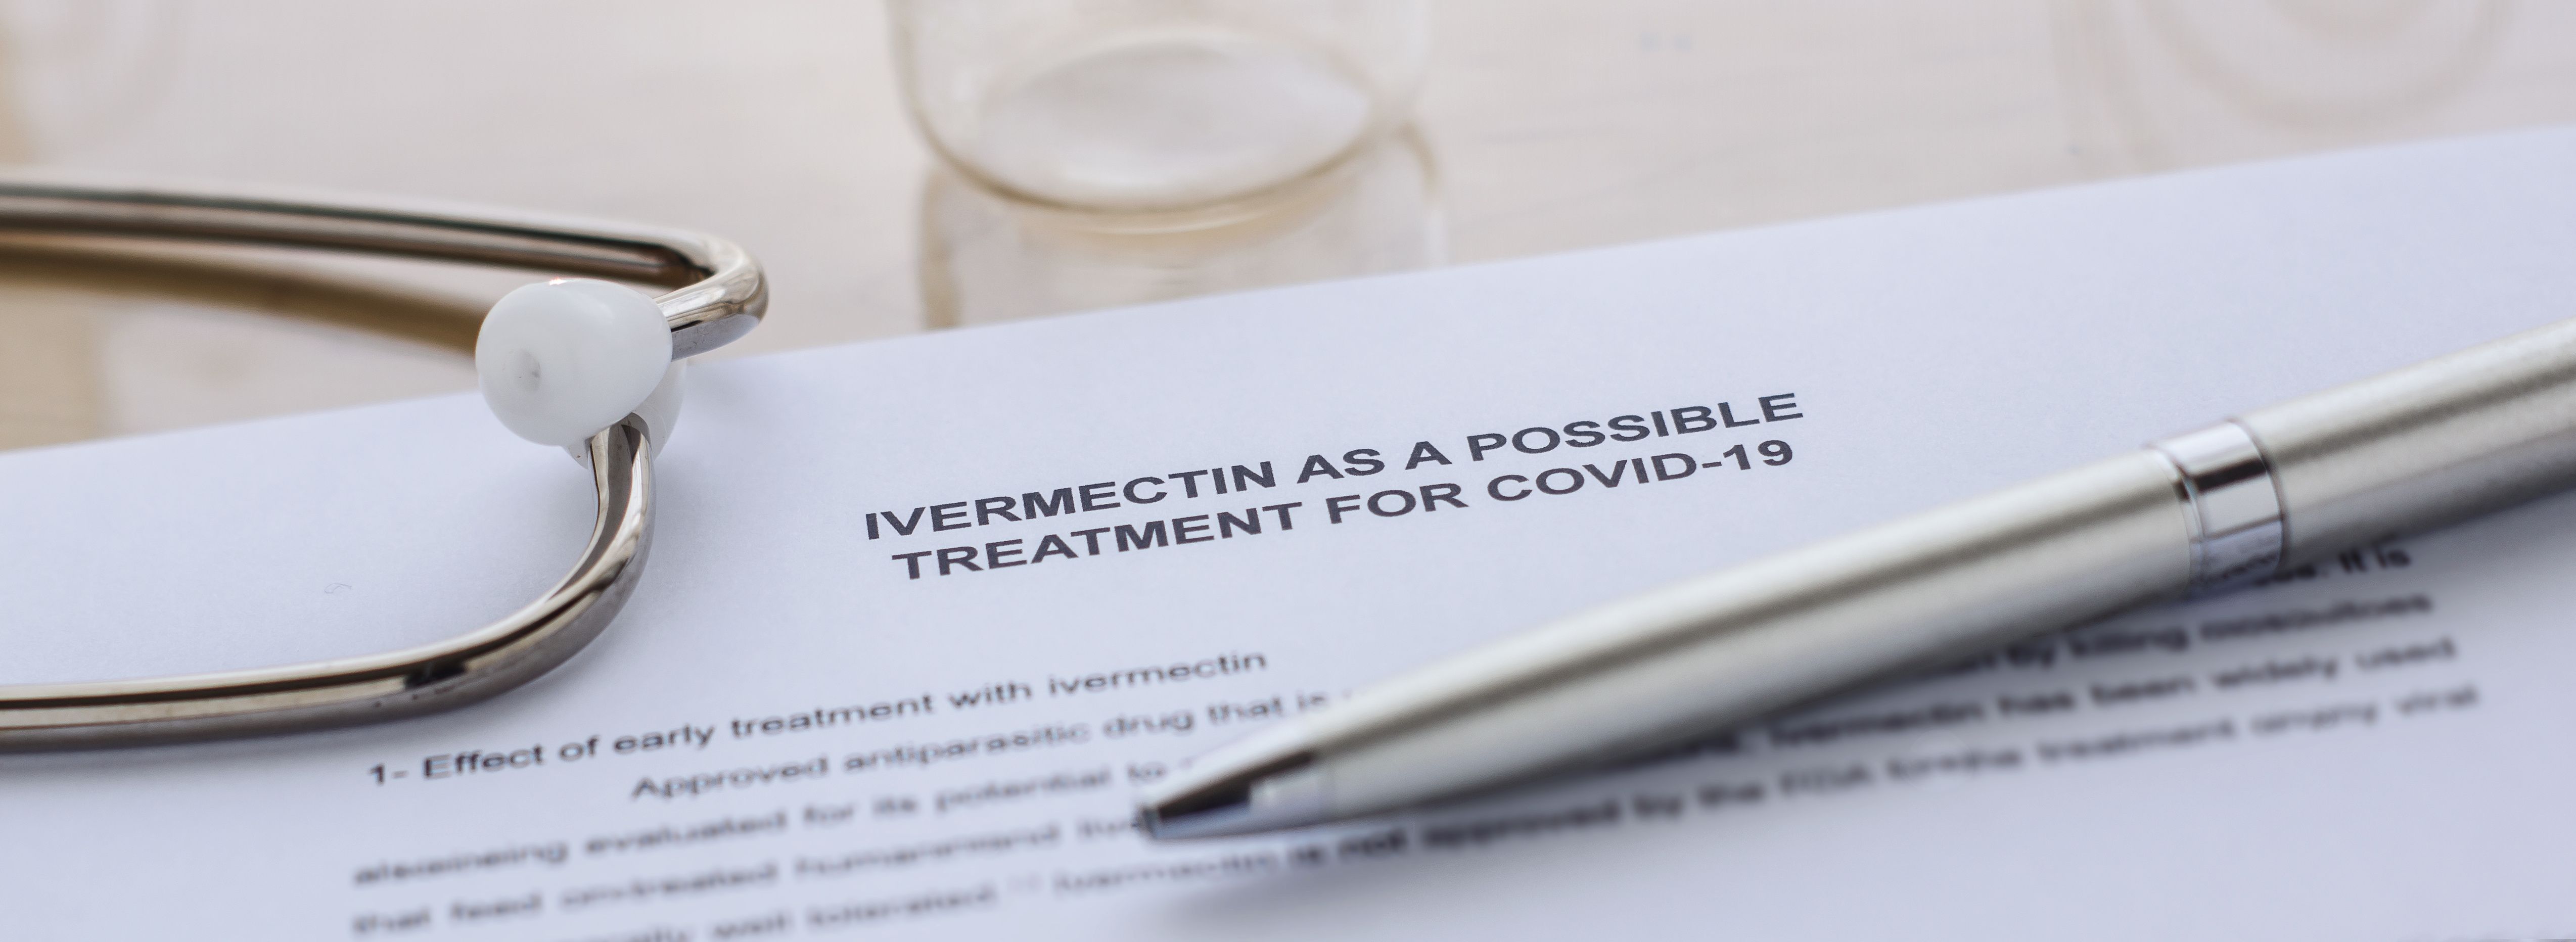 A study of patients at high risk of severe COVID-19 disease progression found ivermectin was no more effective than standard care at preventing adverse outcomes.